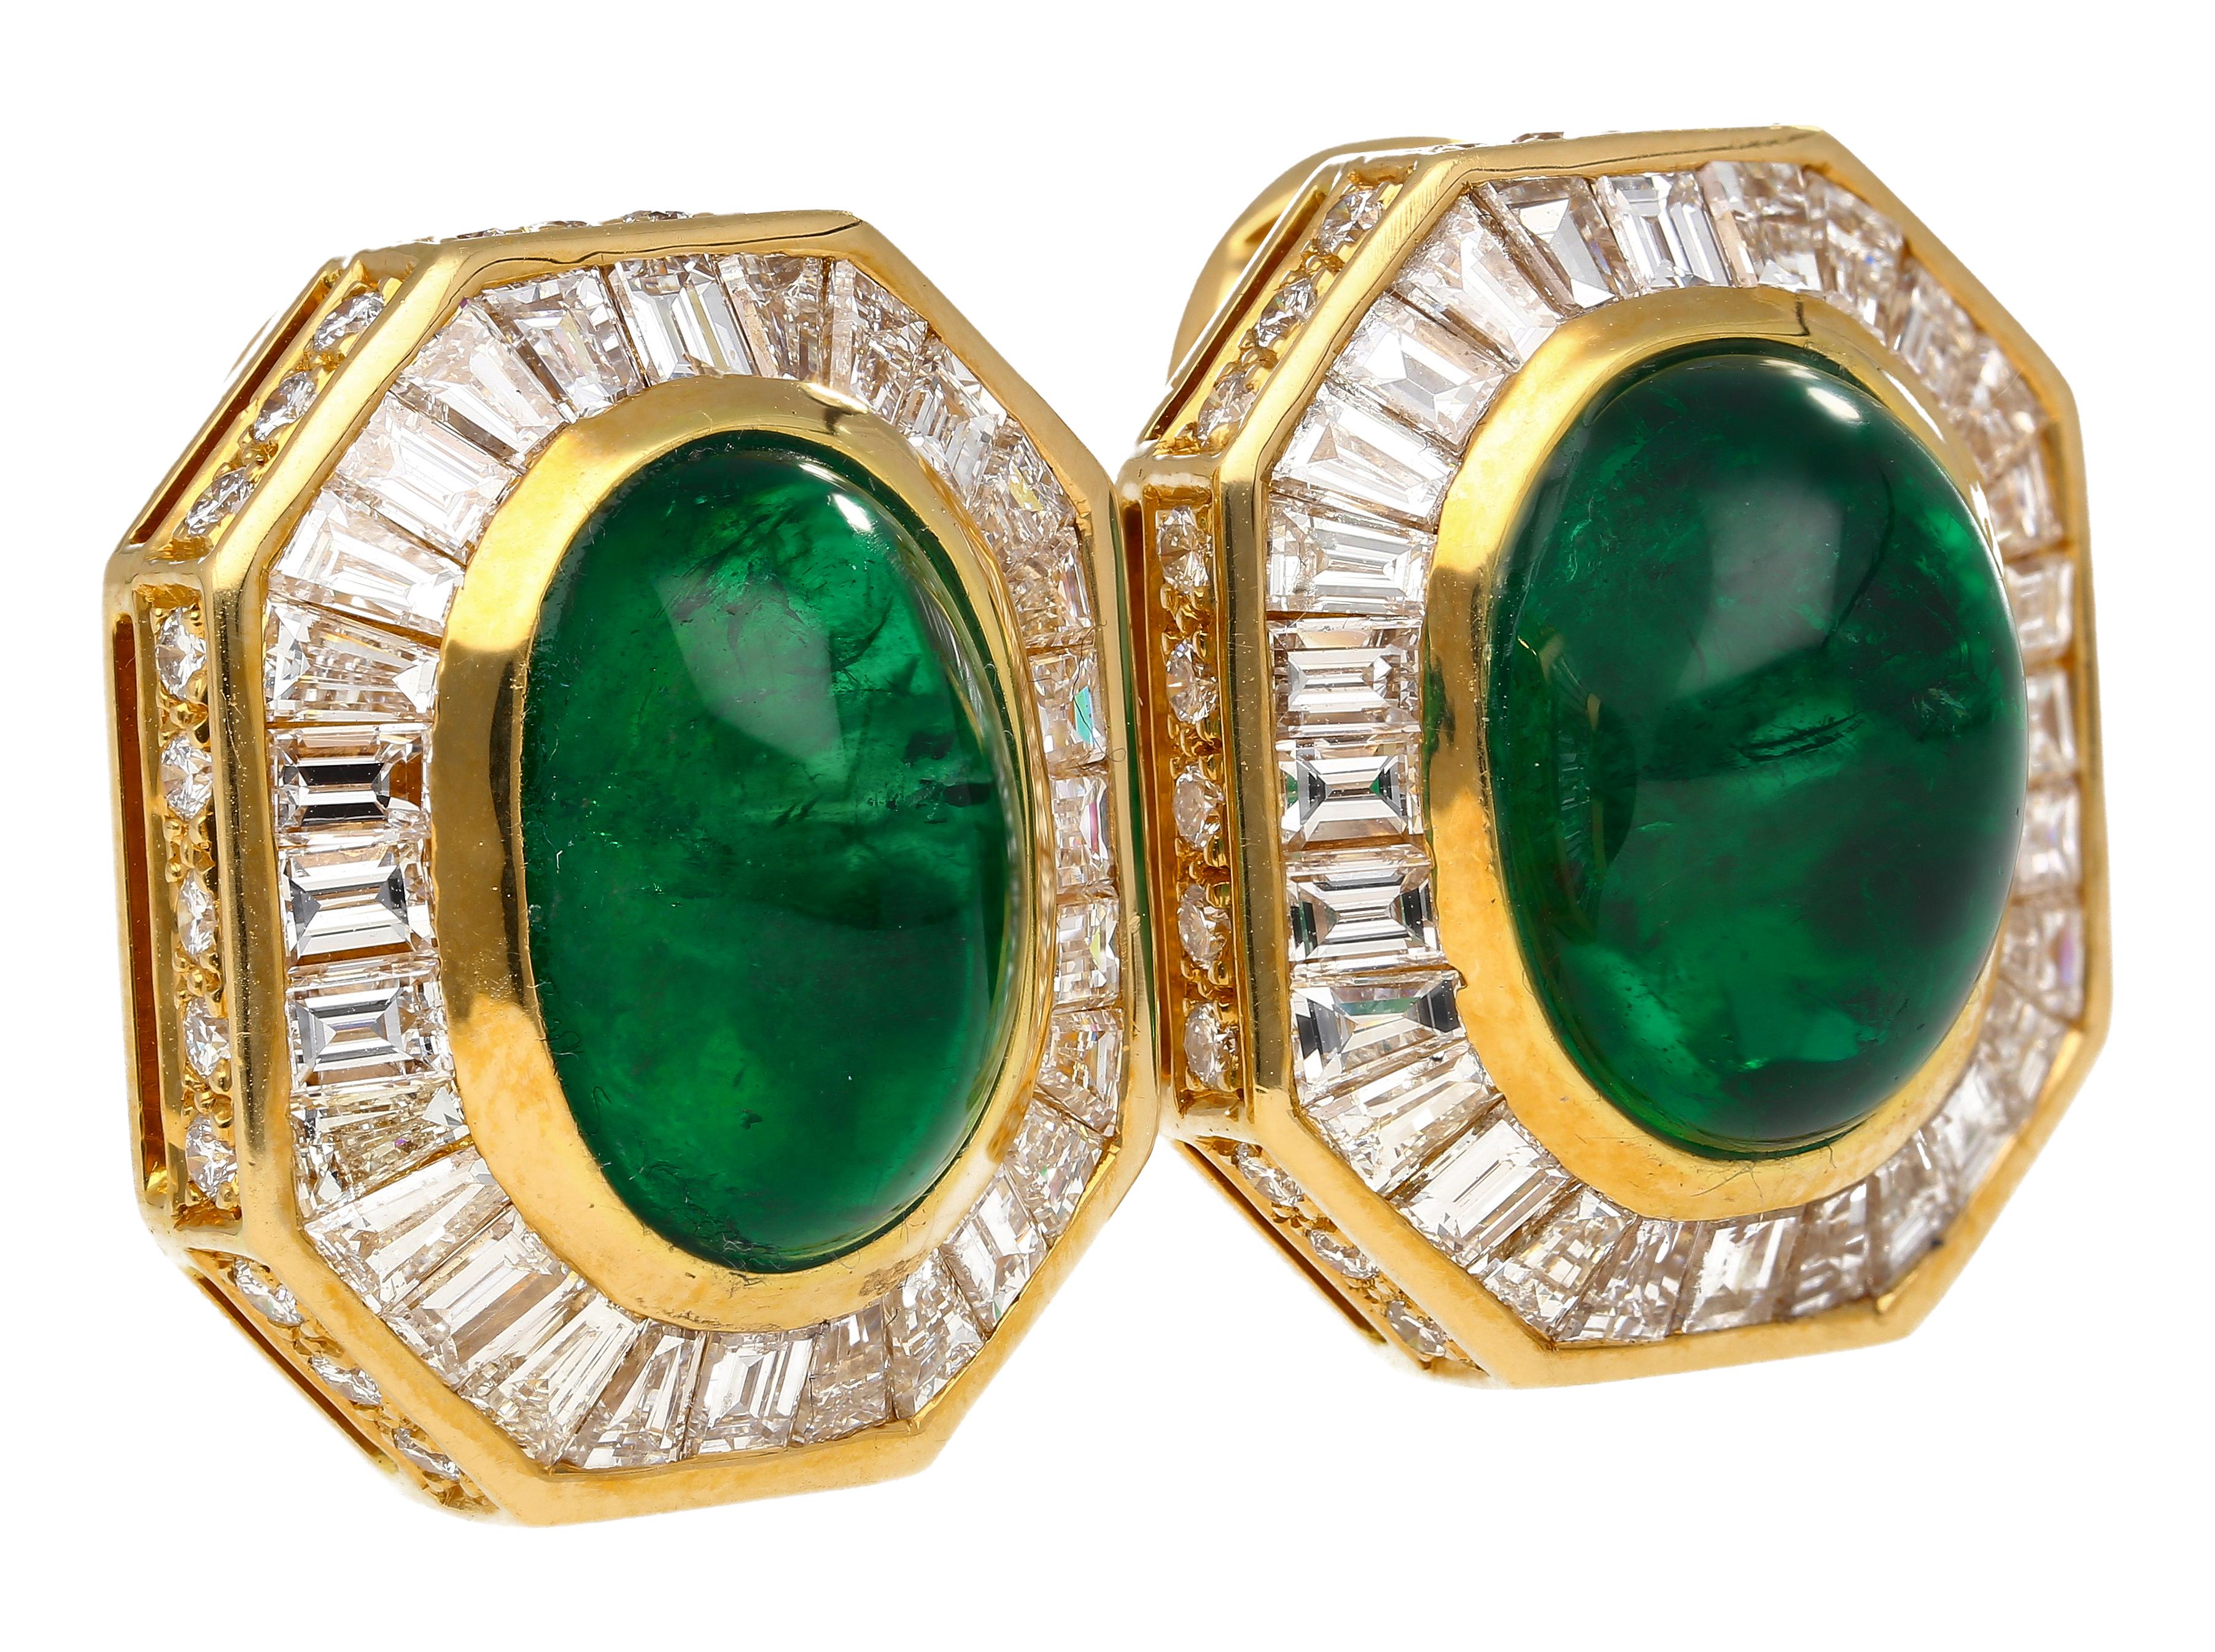 GRS-certified 17.3 carat total cabochon cut Zambian emerald and diamond clip-on earrings. Featuring 4.71 carats of baguette cut diamonds forming a halo around the bezel set center stone. The emeralds, 6.63 carats and 5.96 carats, are a certified